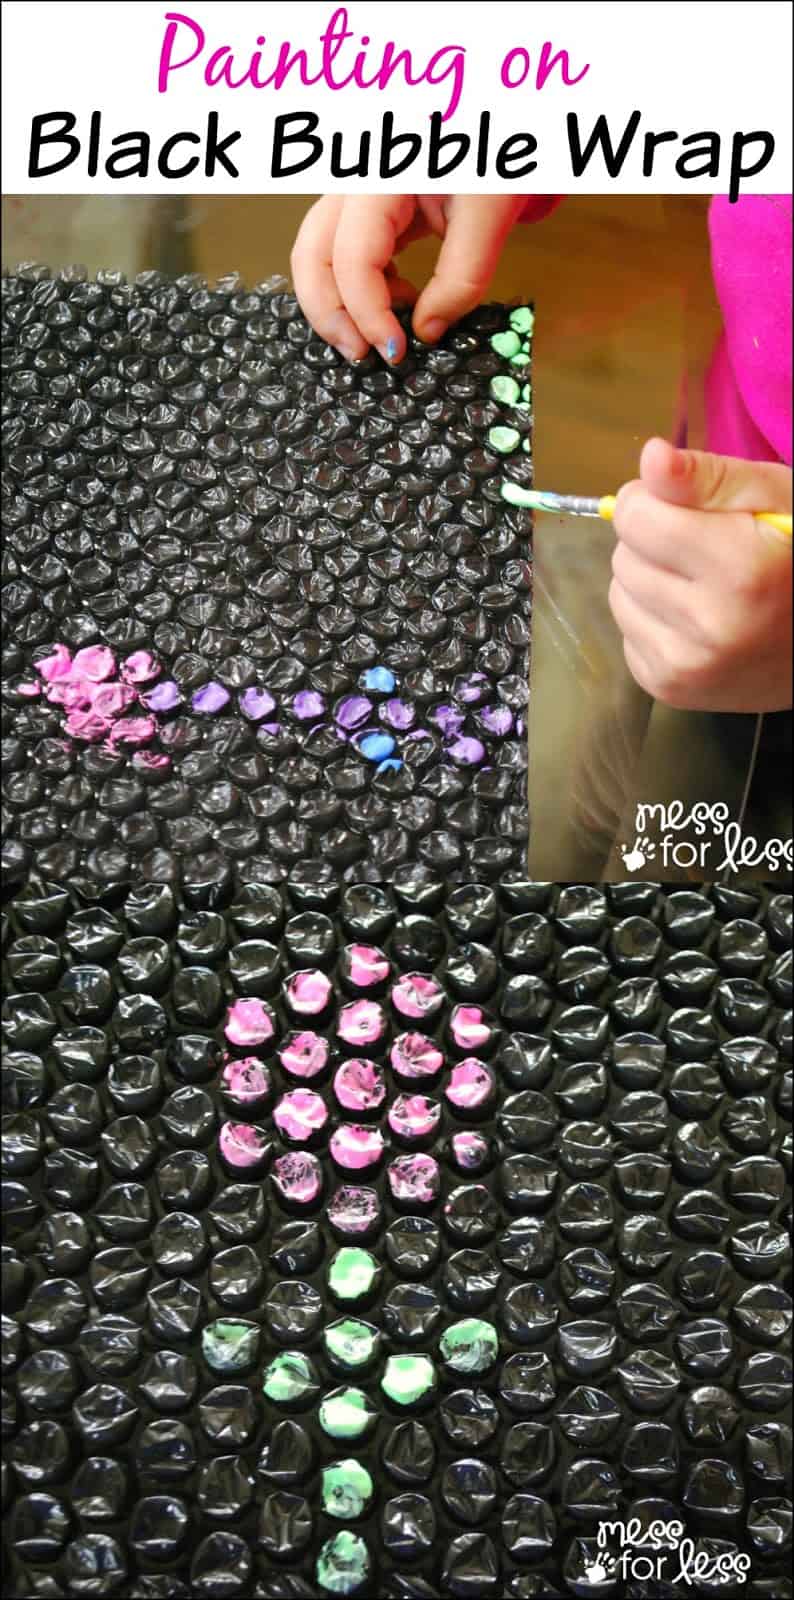 Painting on Black Bubble Wrap - Such a great medium for creating bold, eye catching art. Looks almost like a lite-brite!